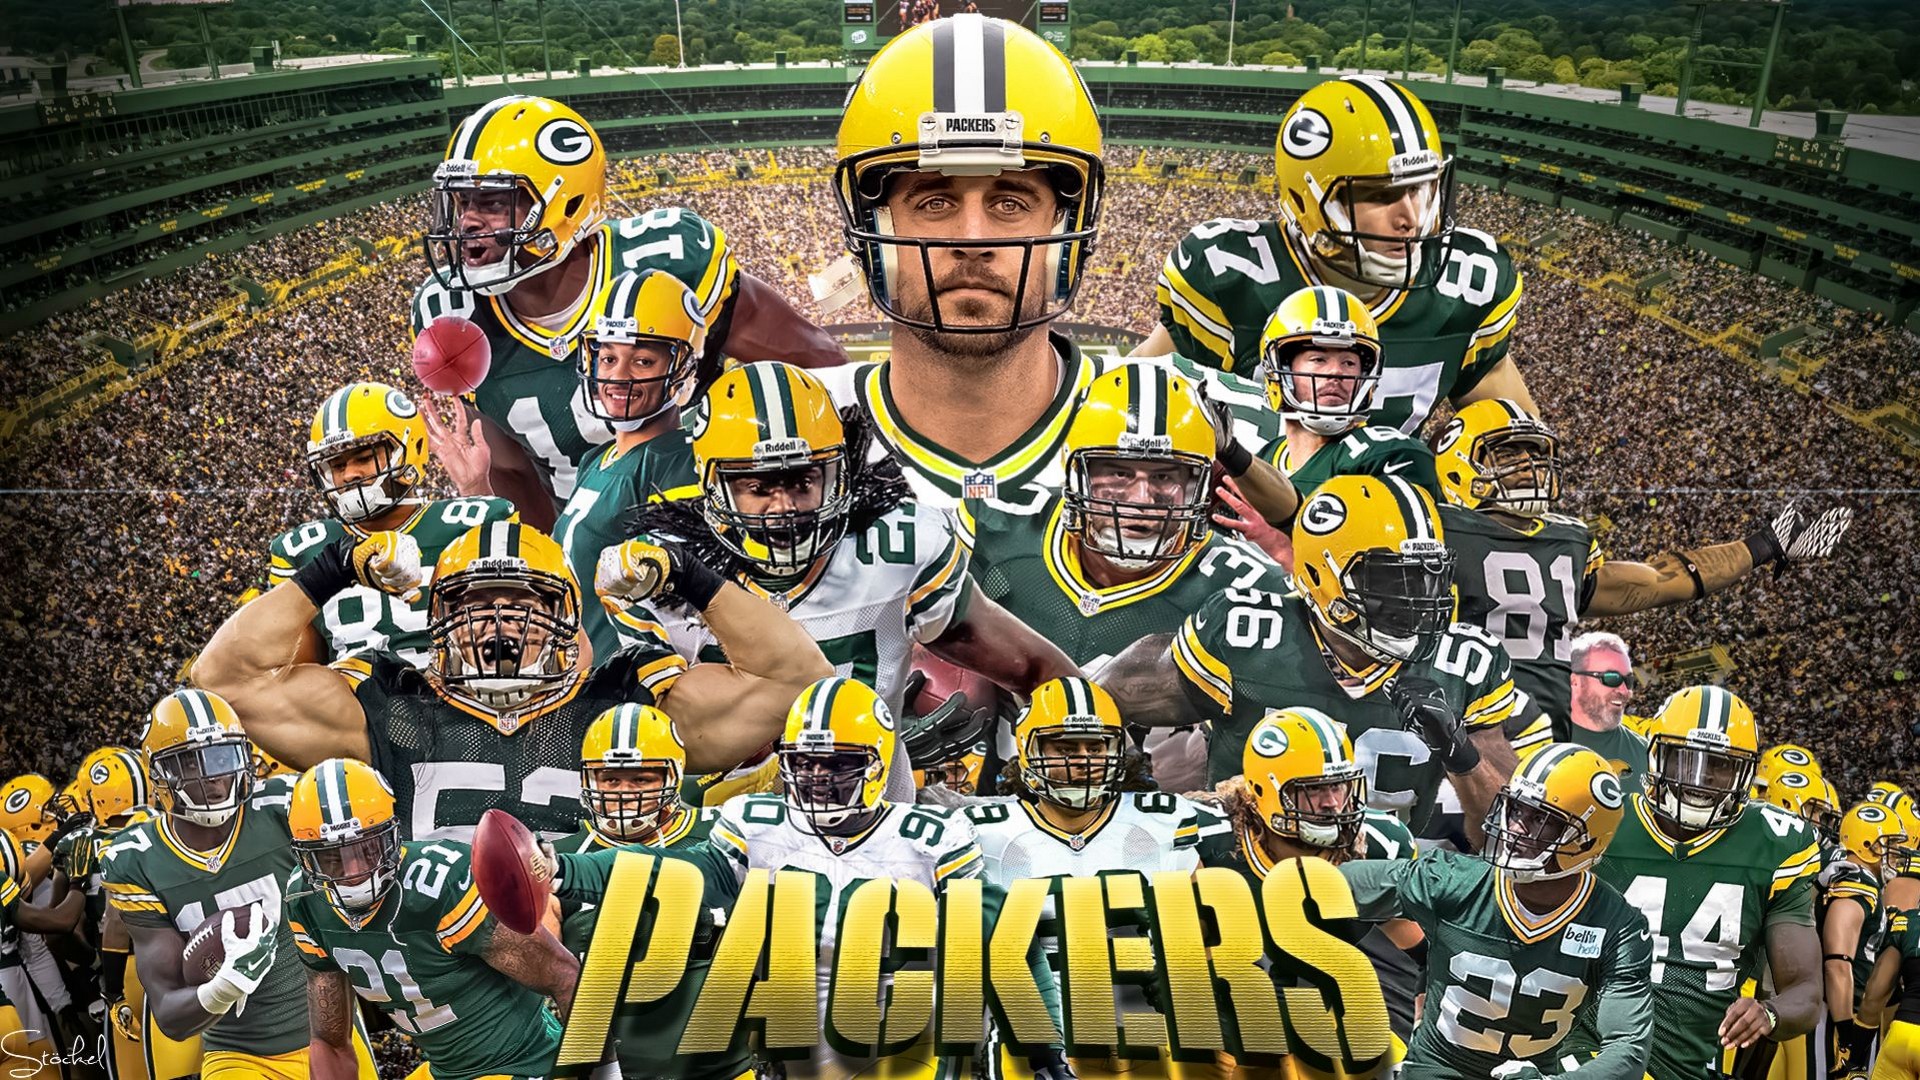 Green Bay Packers Wallpaper for Computer.